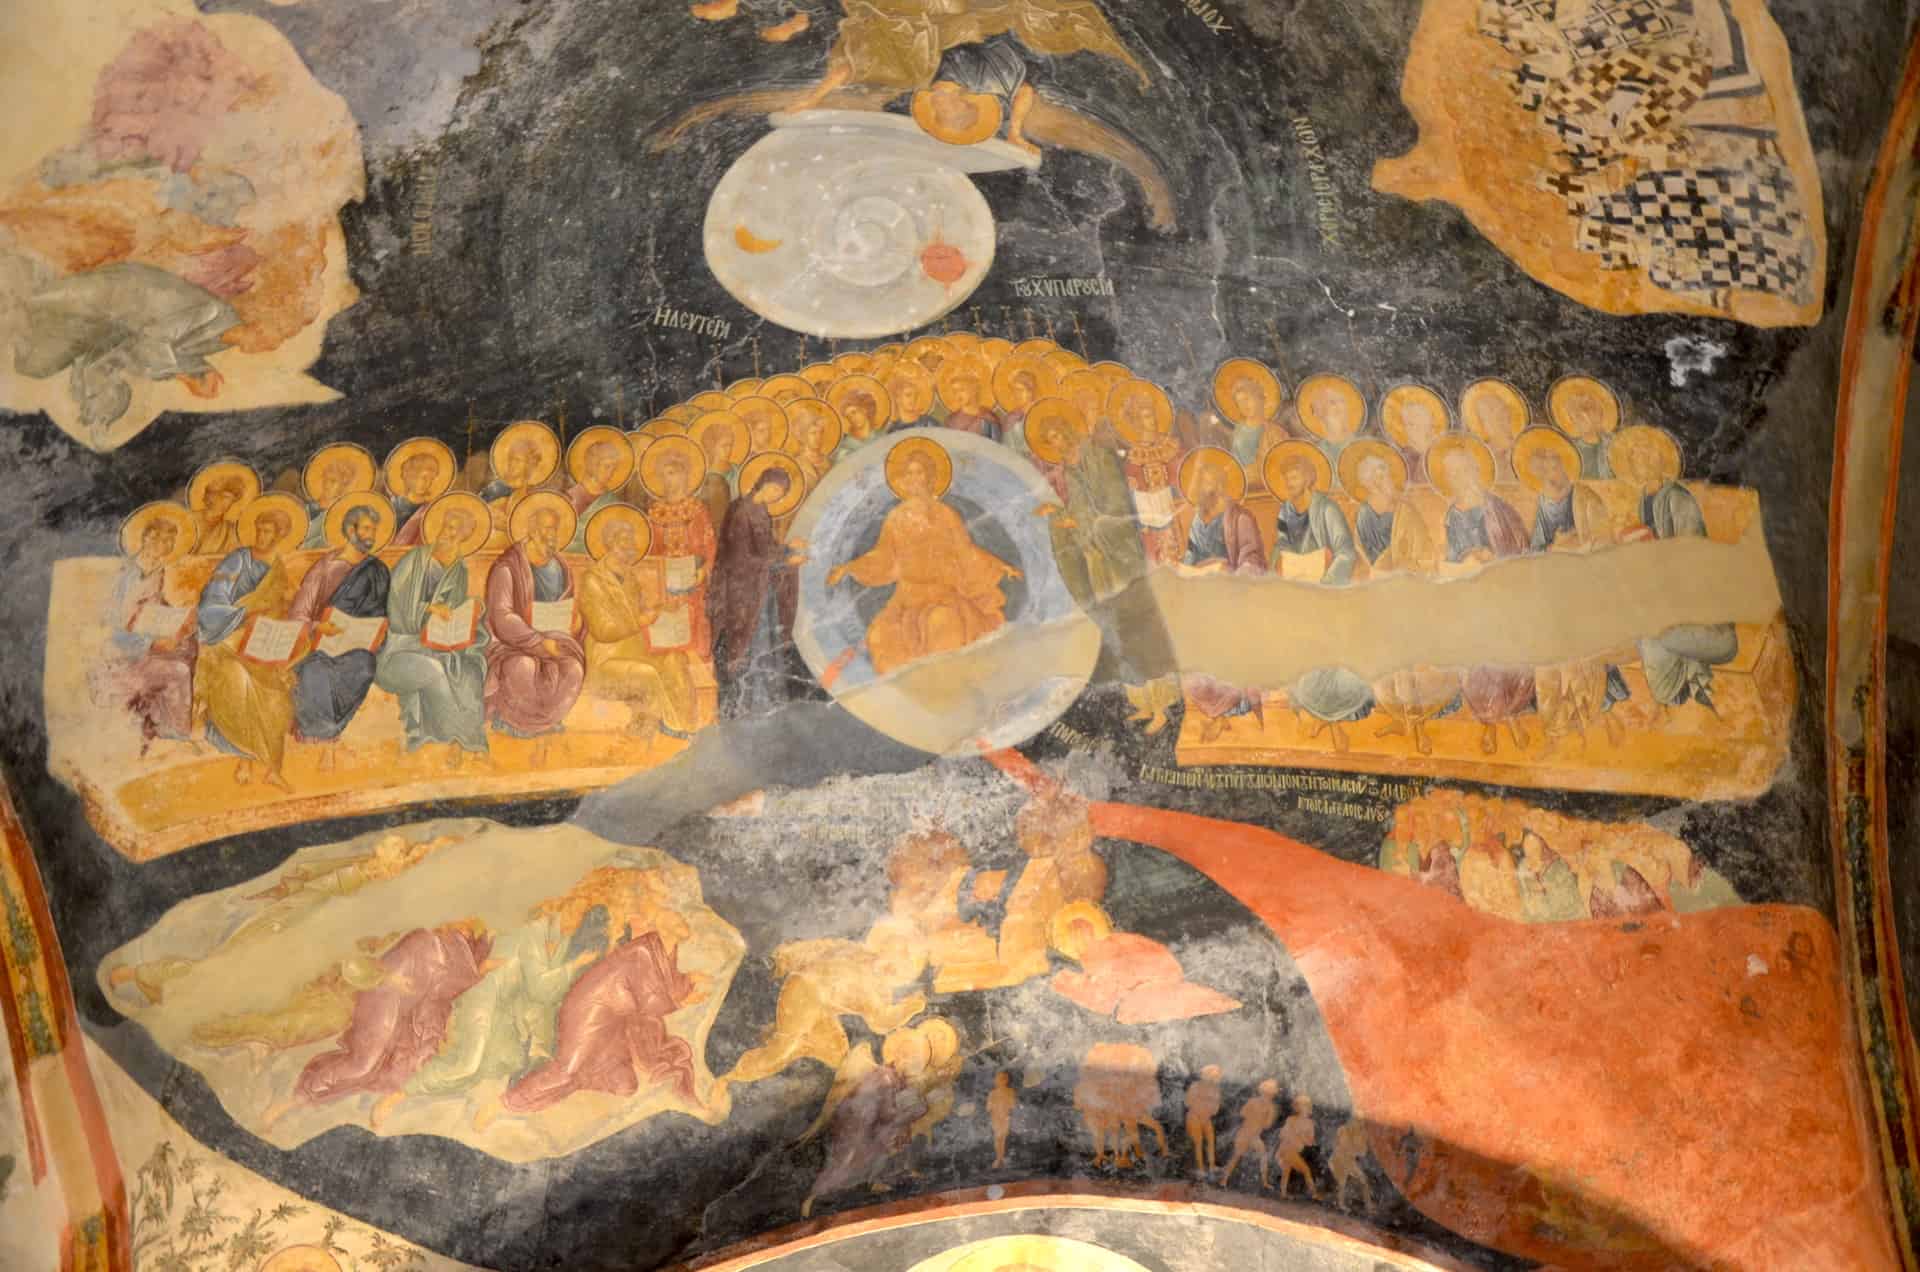 Second Coming of Christ in the Parecclesion at Chora Church in Edirnekapı, Istanbul, Turkey